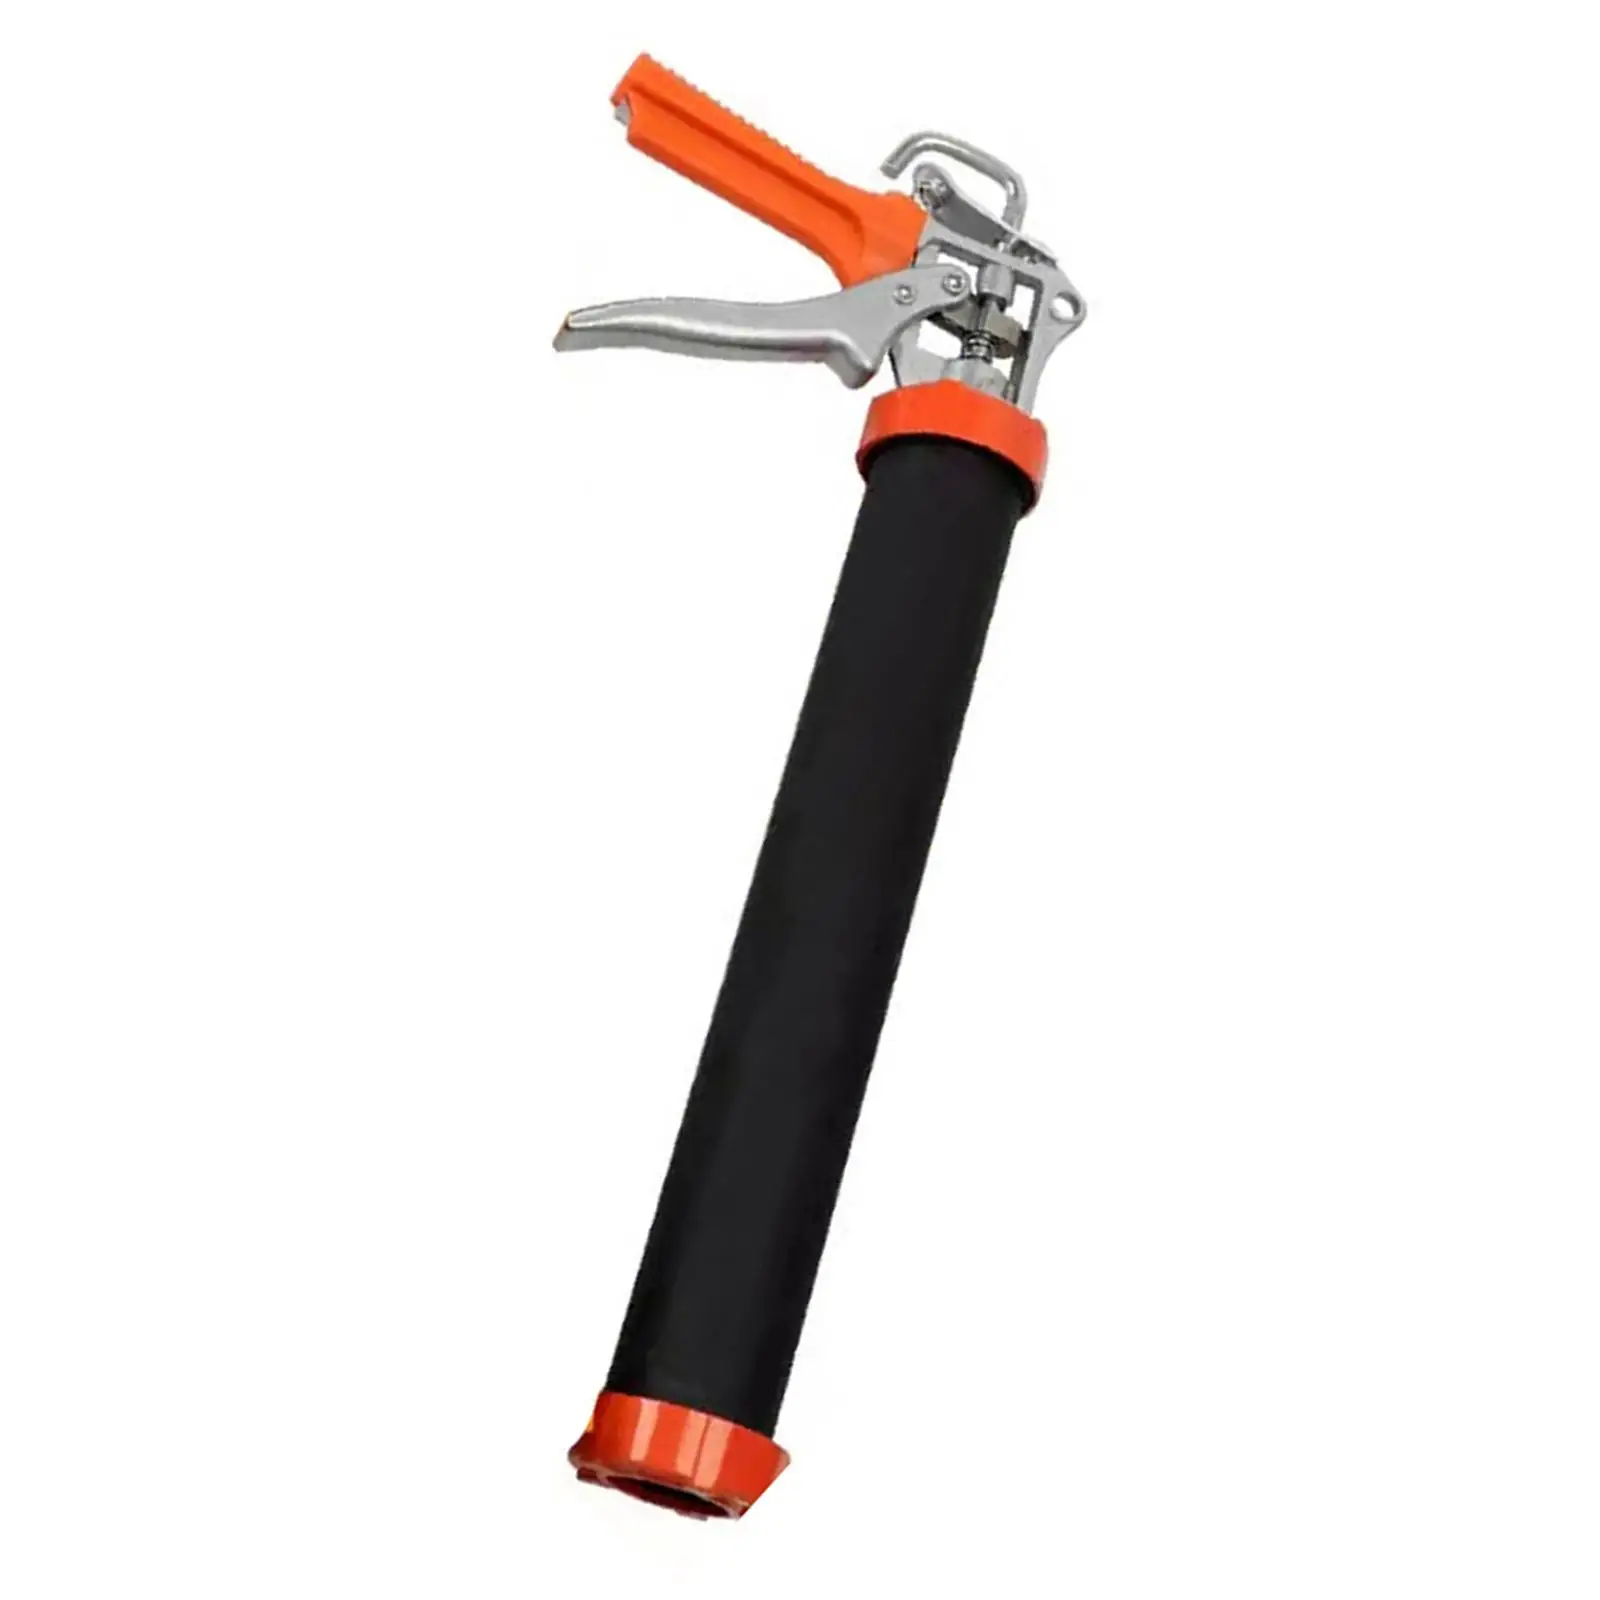 Caulk Tool Heavy Duty Multifunctional Professional with Comfort Grip Sealant Tool for Filling Sealing Home Repairs Tiles Kitchen